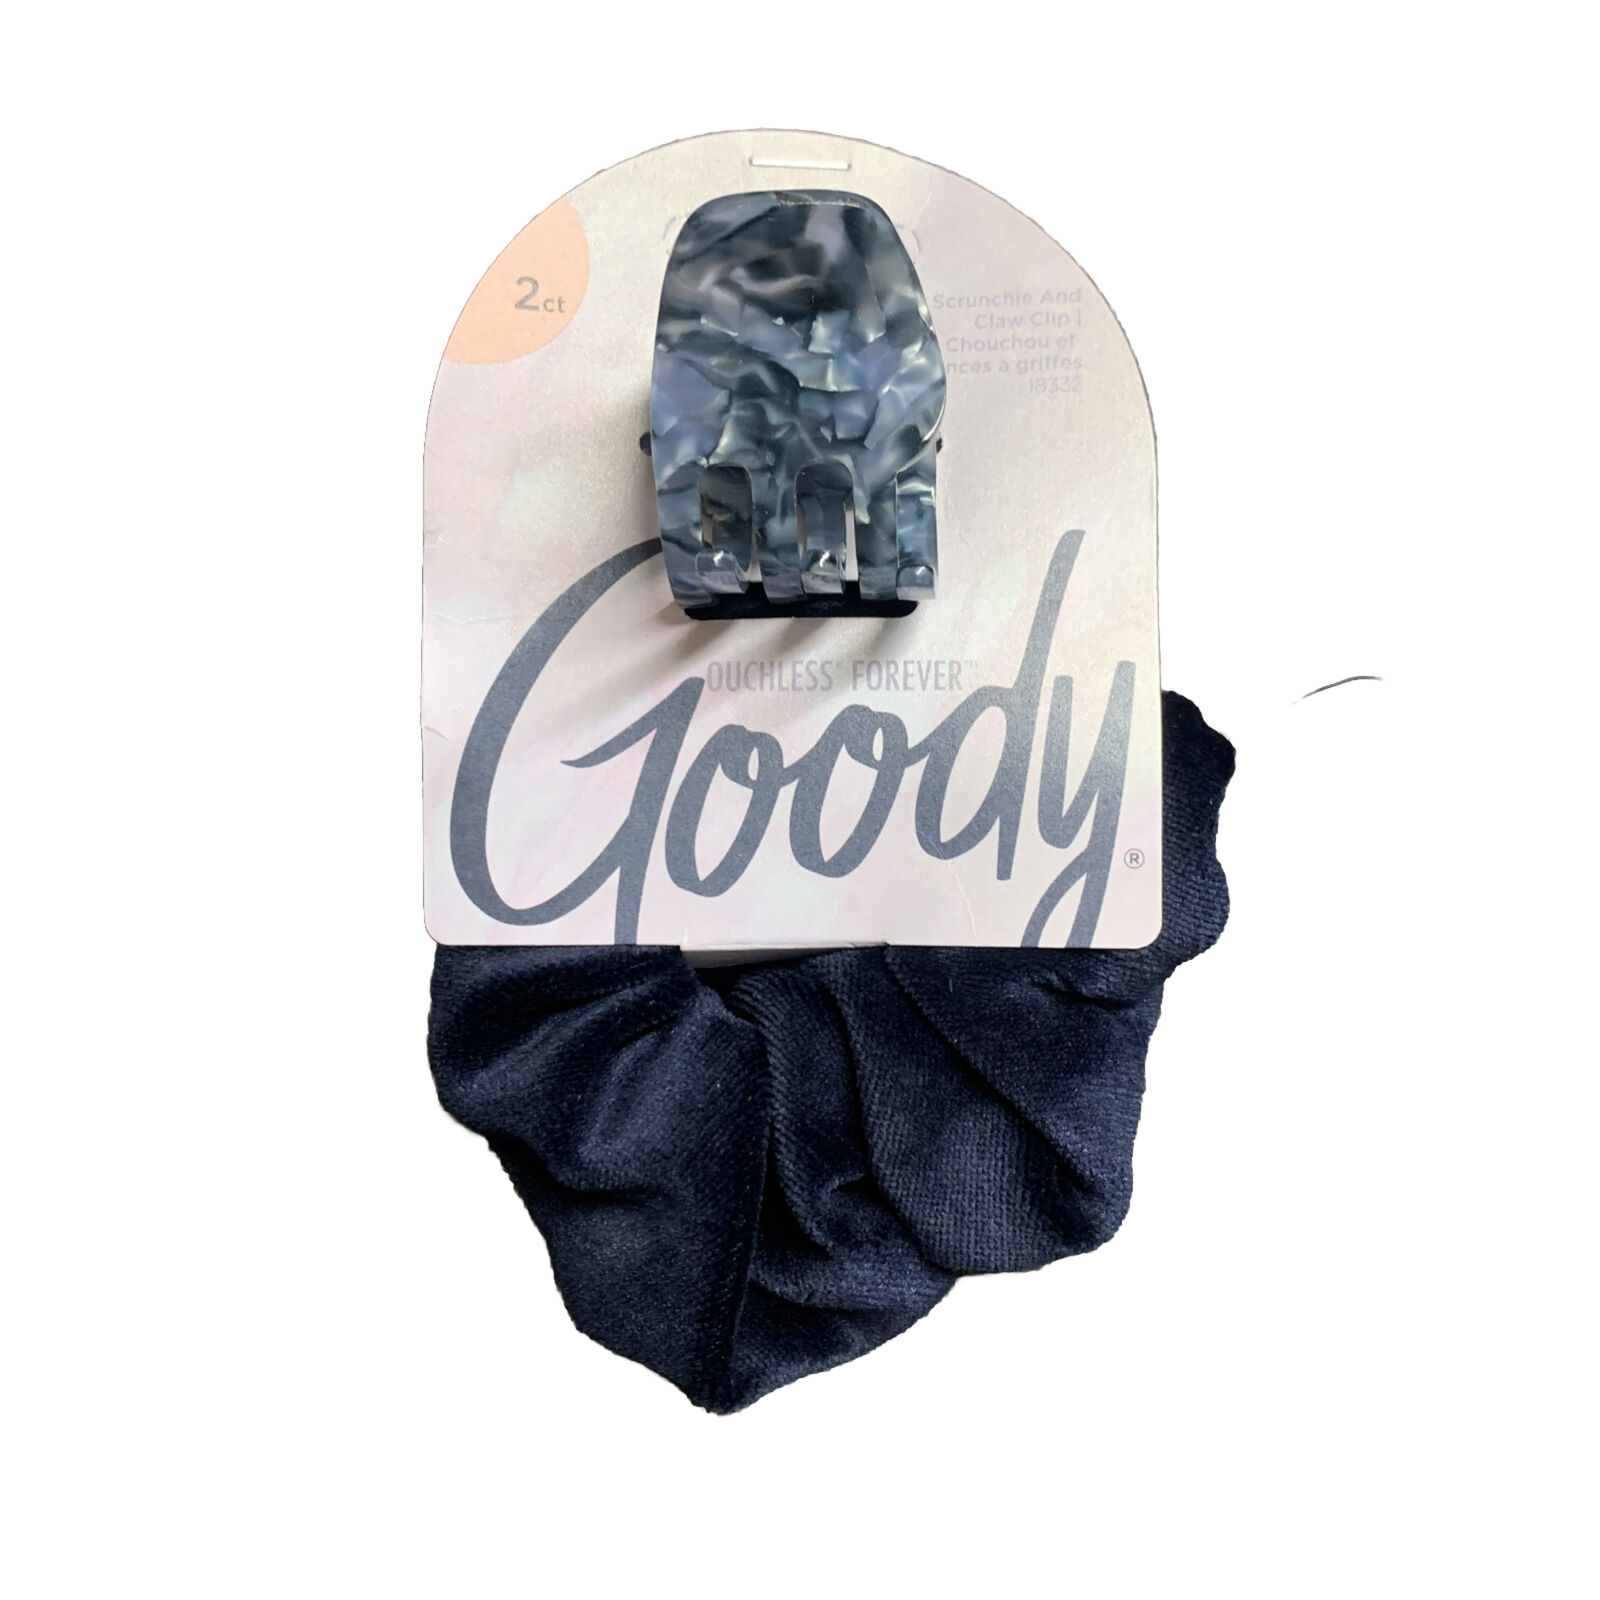 GOODY FOREVER SCRUNCHIE & CLAW CLIP-BLUE UPC:041457183328 PACK:72 NO INNER